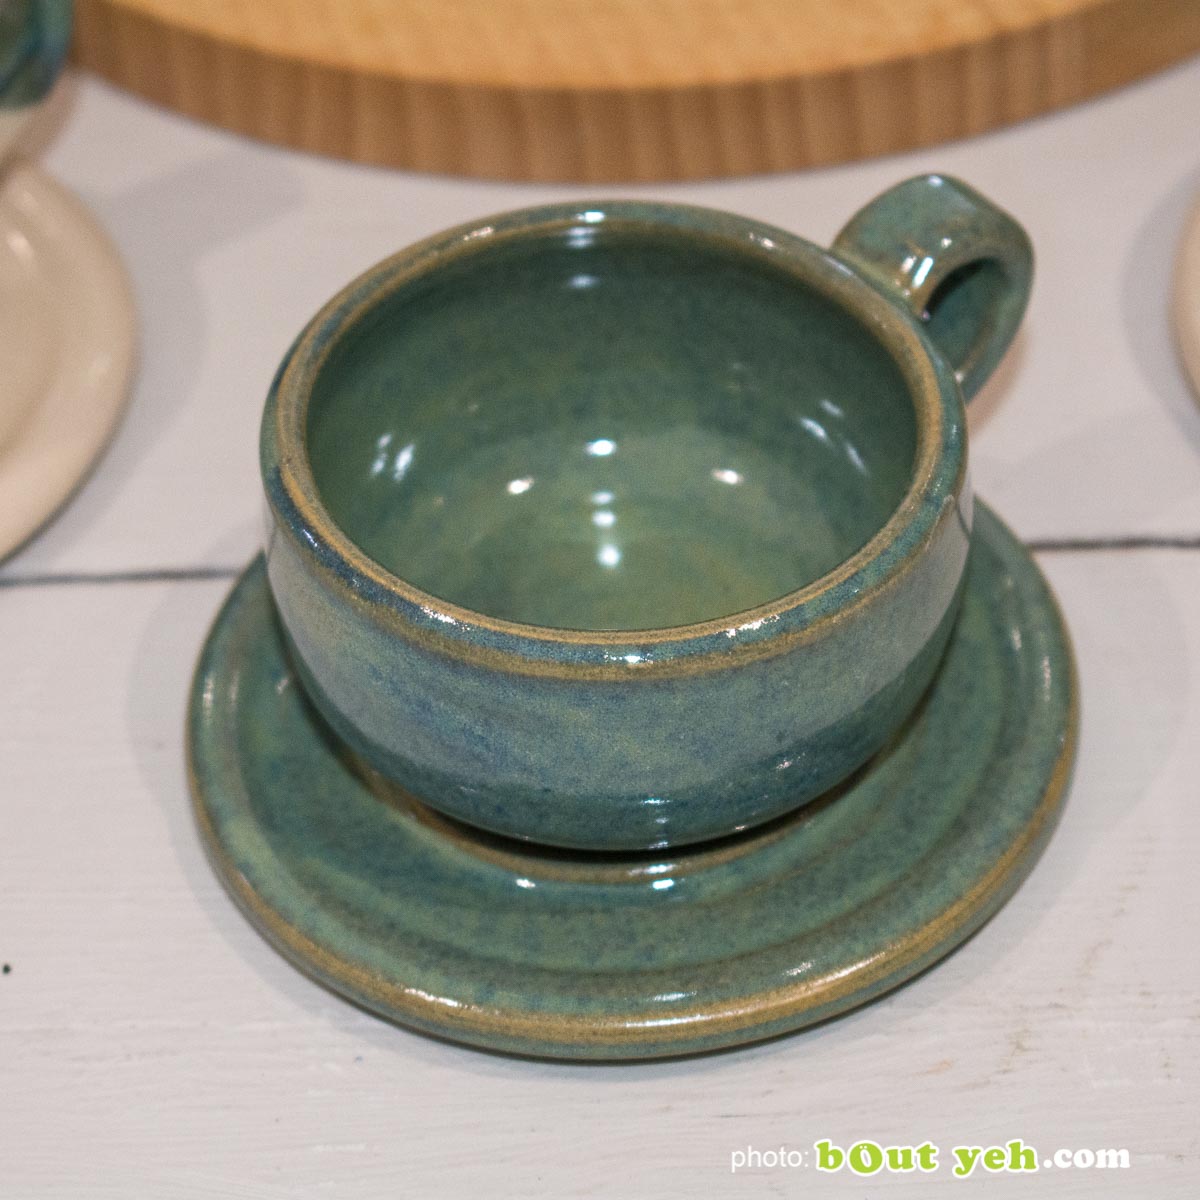 Hand made espresso set of 2 cups and saucers in green and blue - photo 1432.